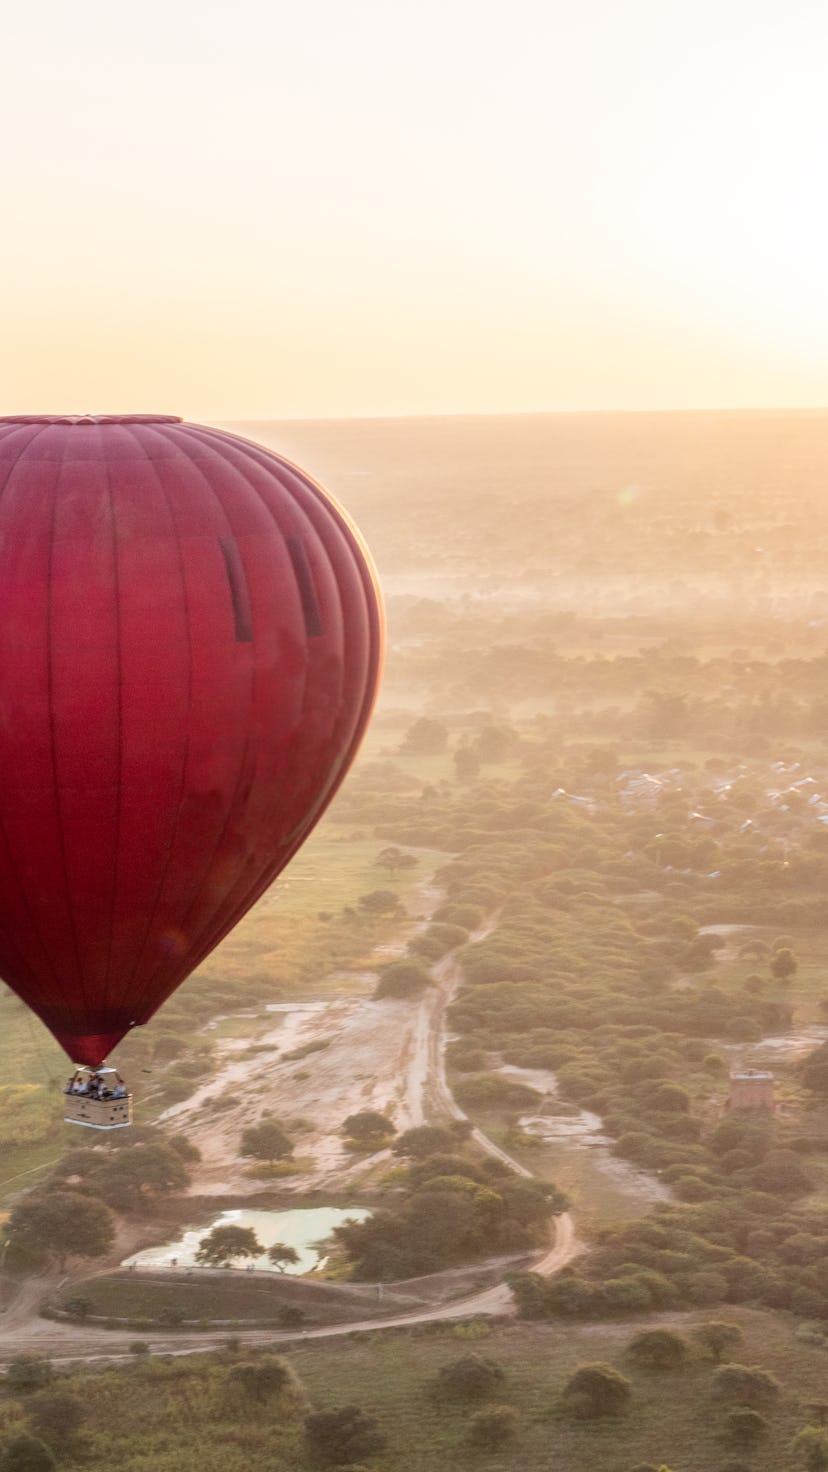 hot air balloon floating over a big field, meant to represent the author's ectopic kidney 